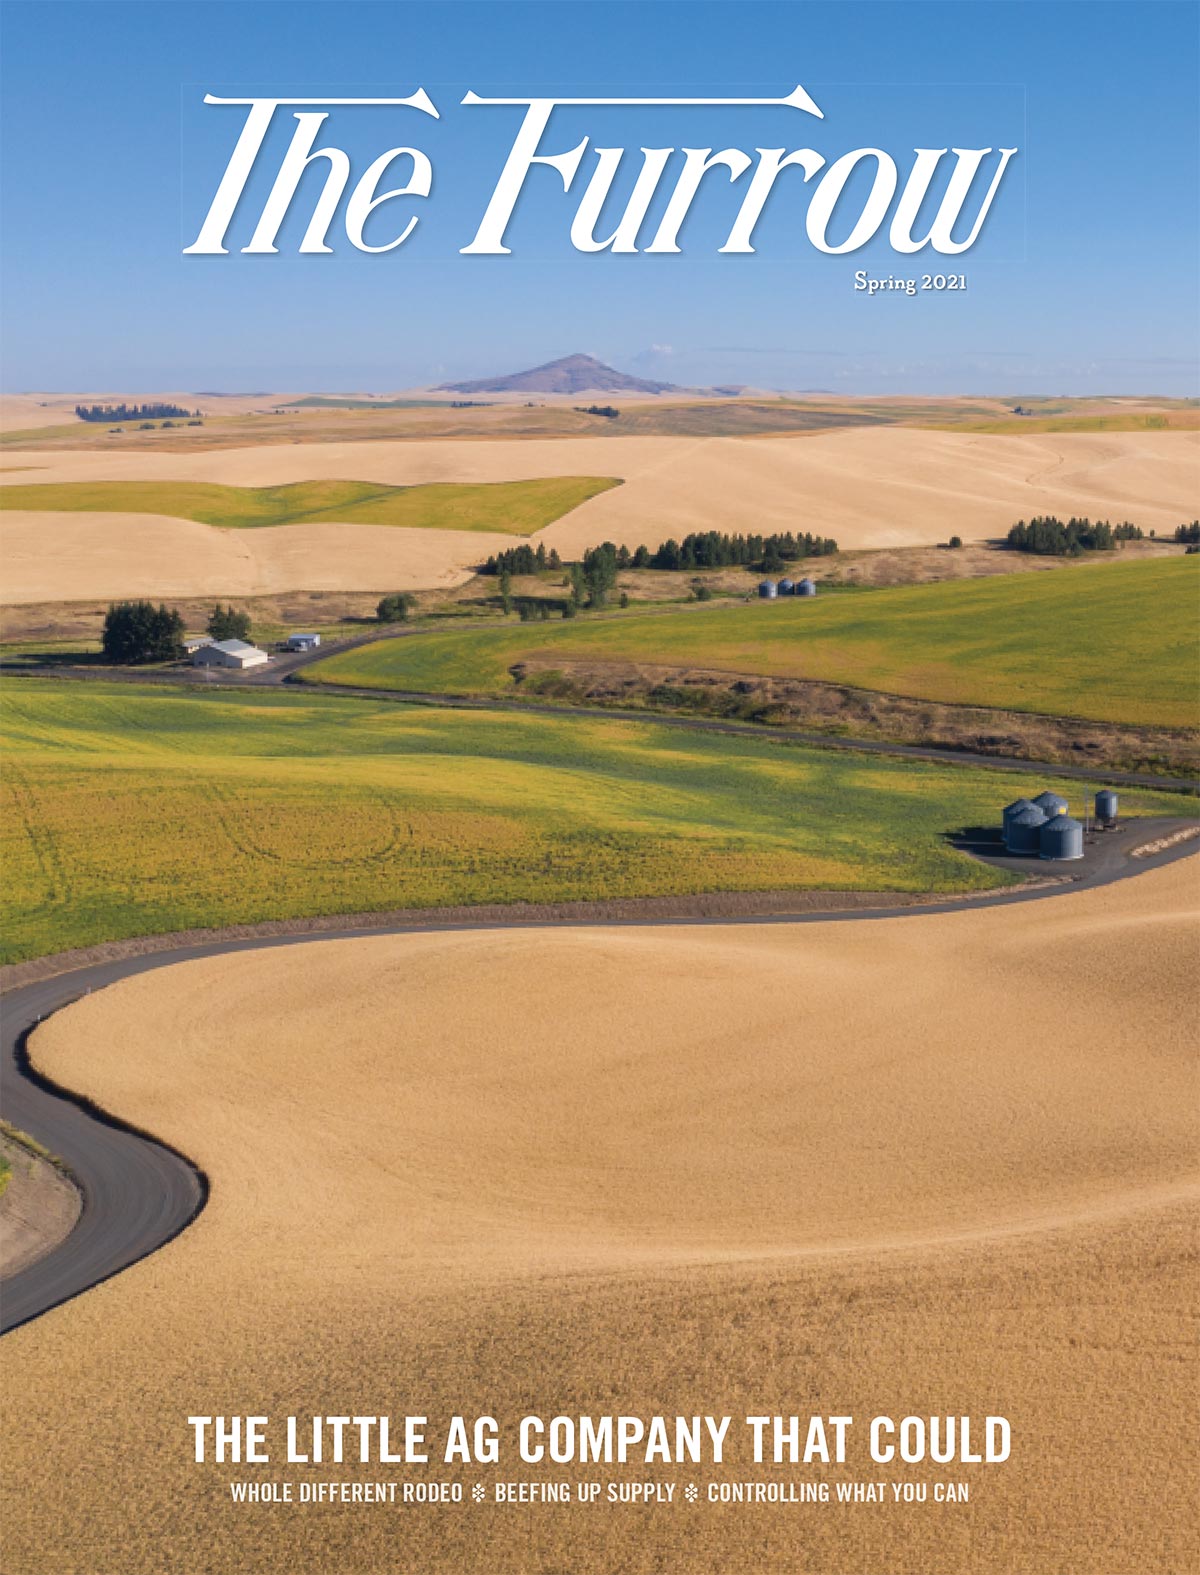 The Furrow - Spring 2021 Issue